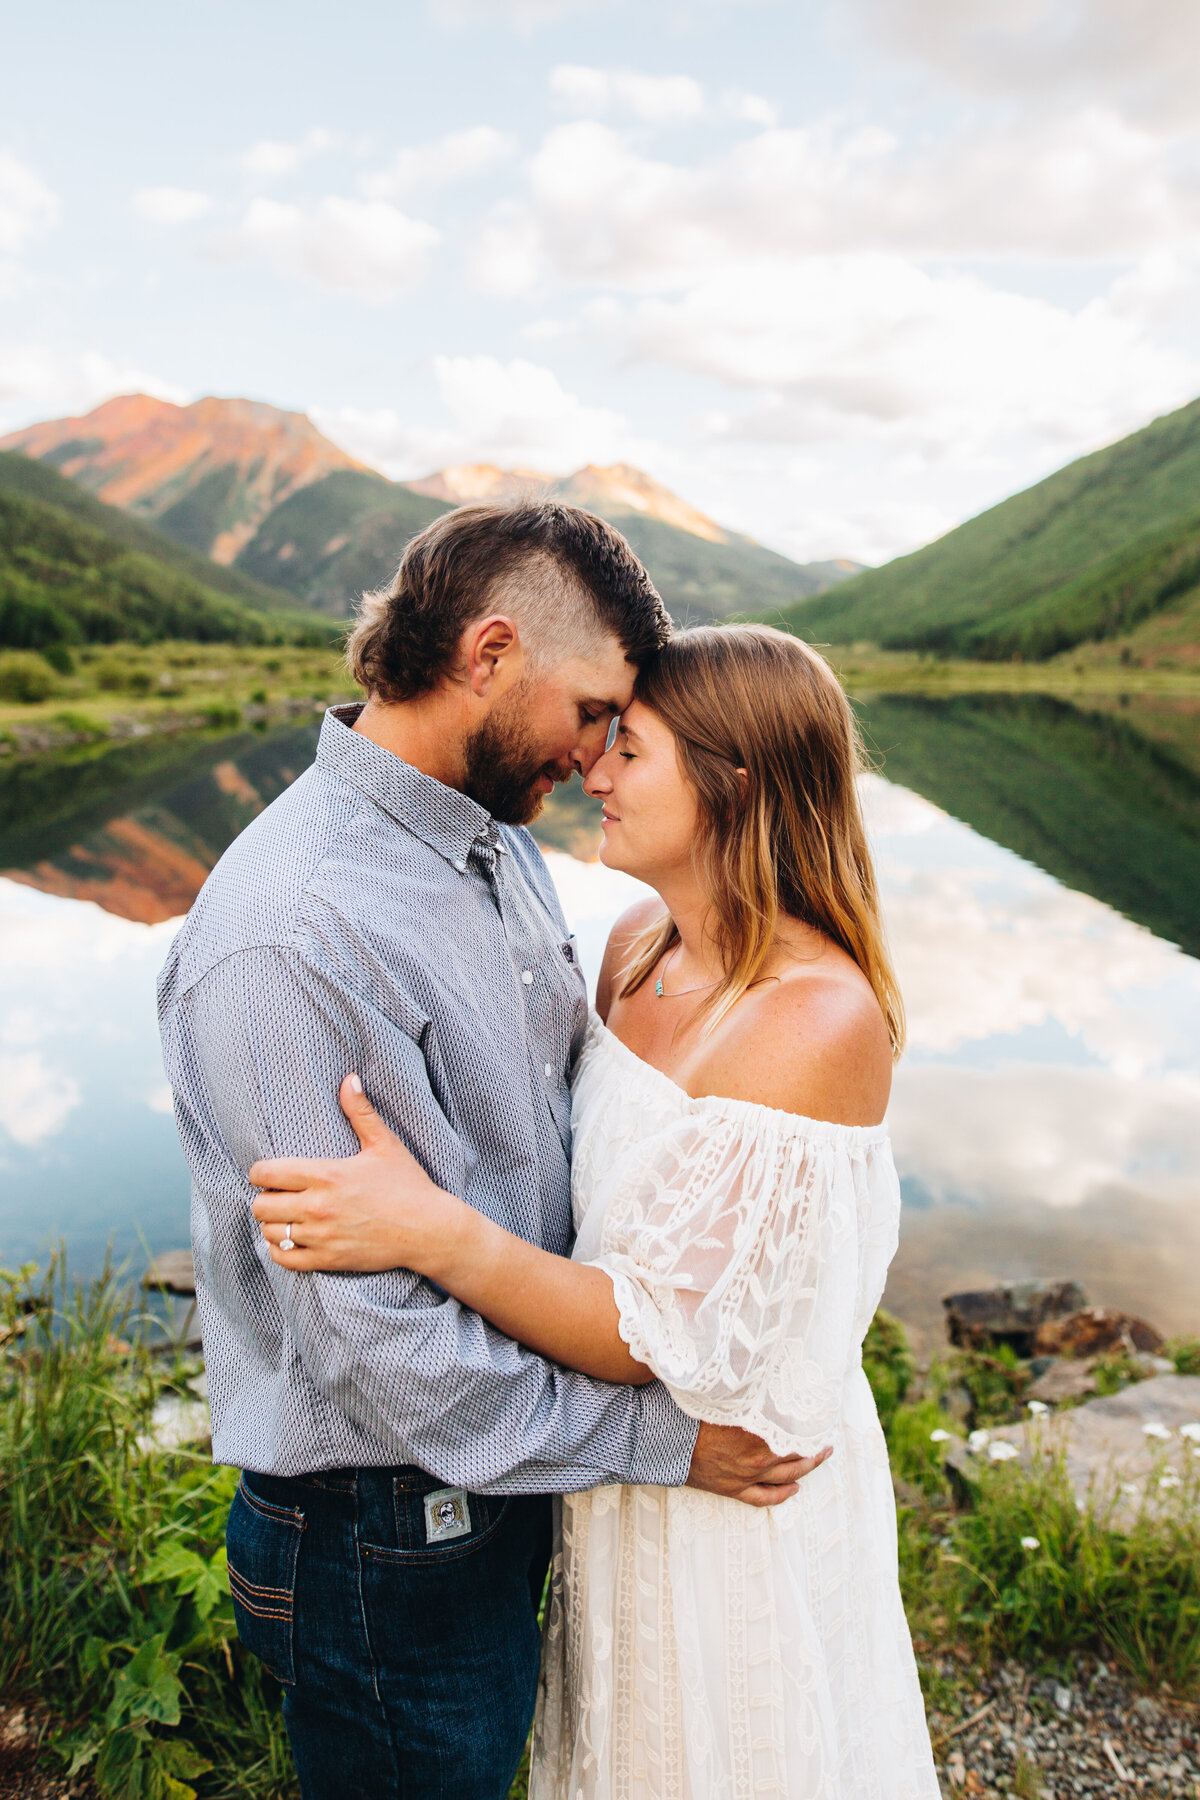 Ouray engagement session in front of a lake and Red Mountain.